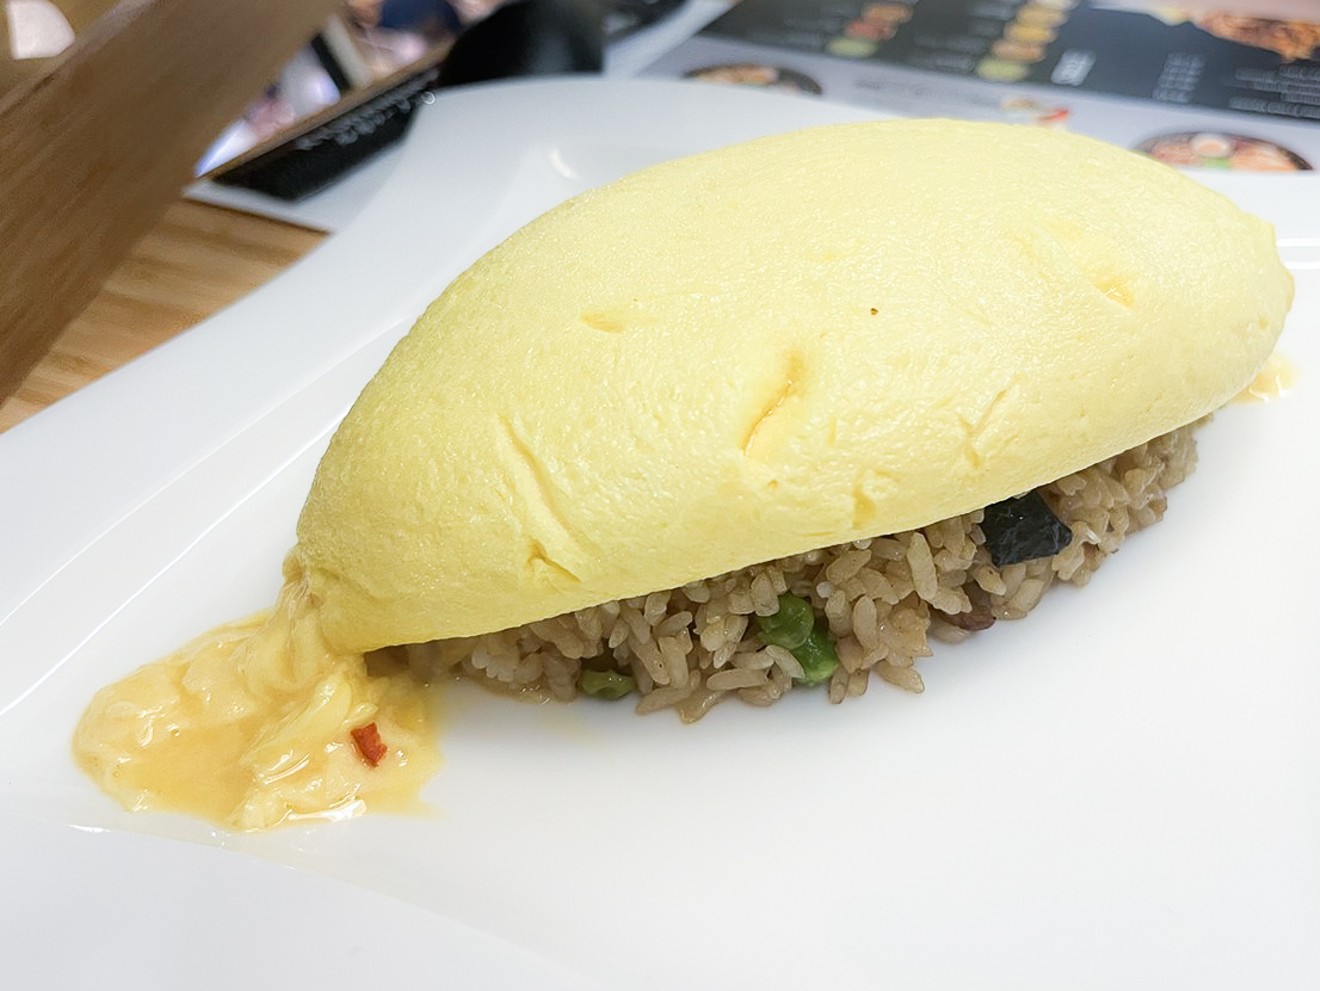 The Omurice has arrived.